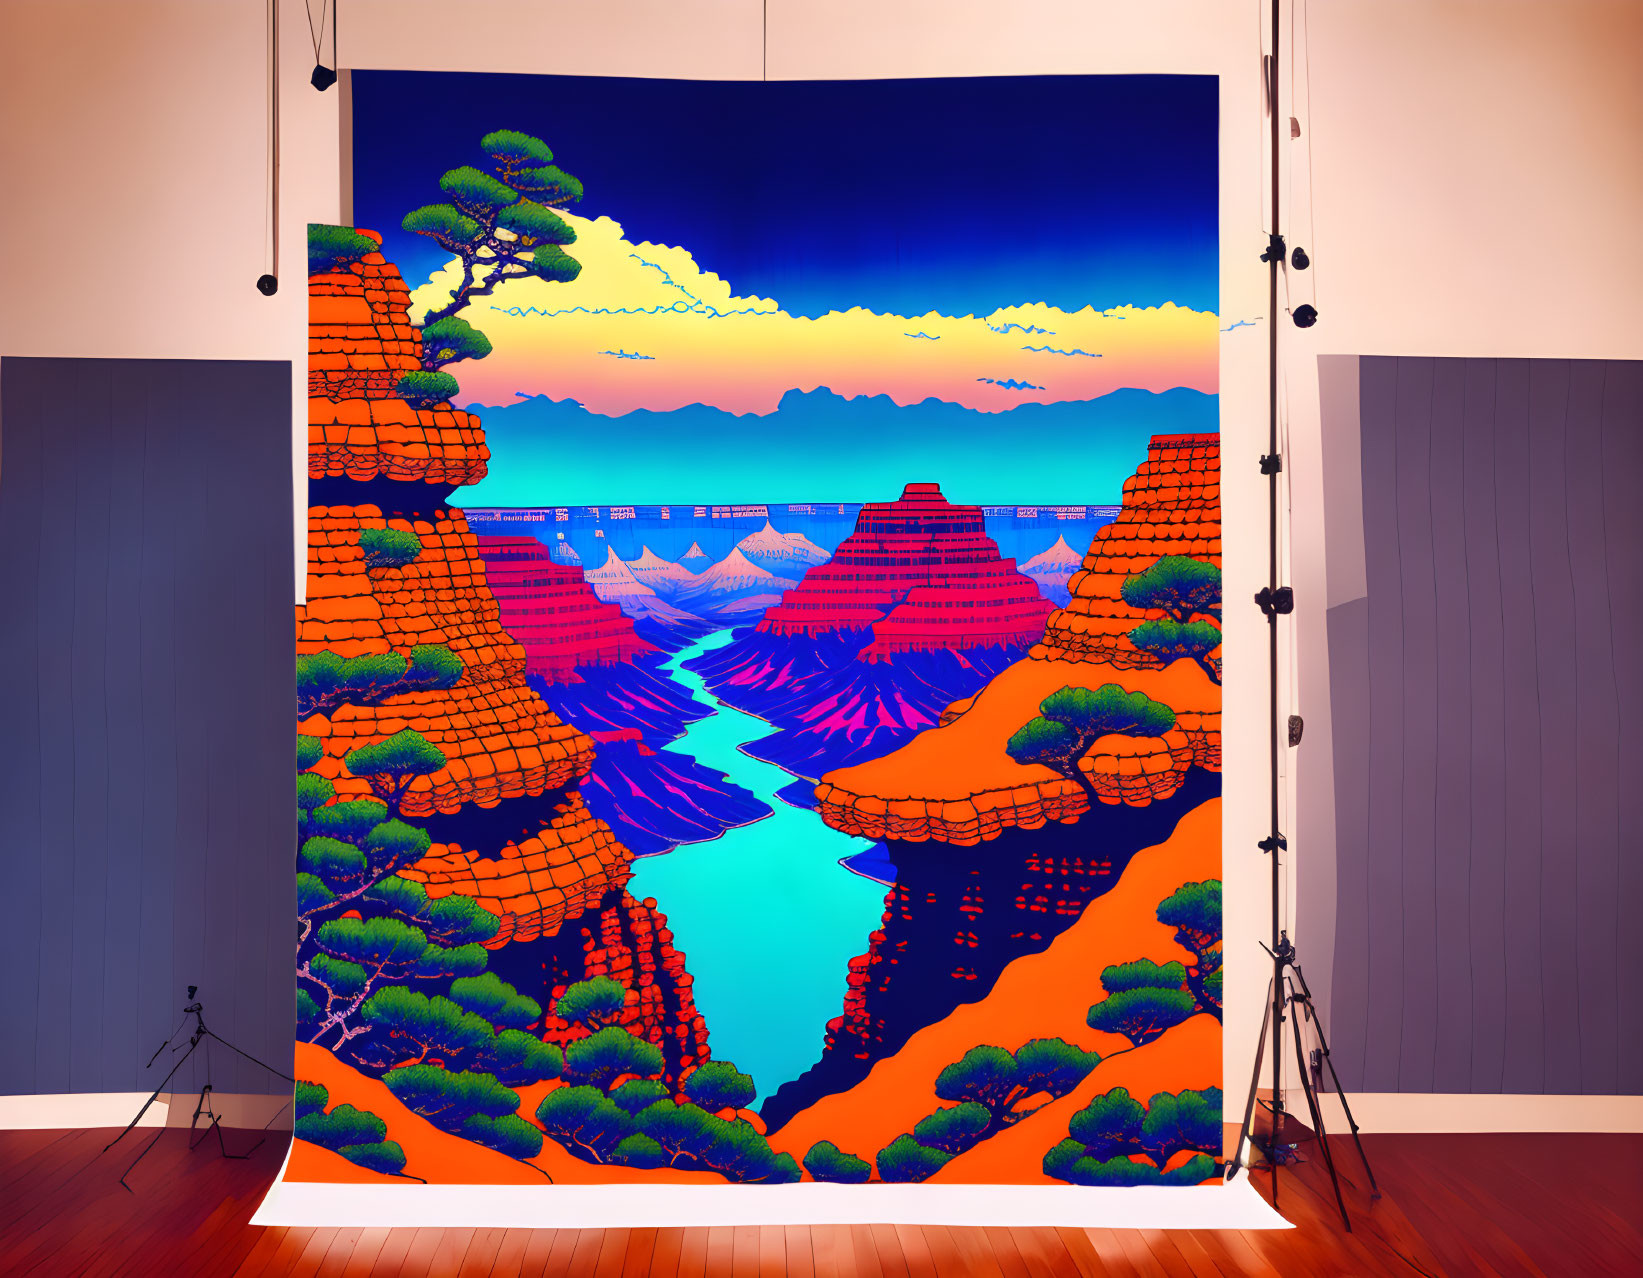 Colorful Canyon Landscape Artwork Hanging in Room with Lighting Equipment